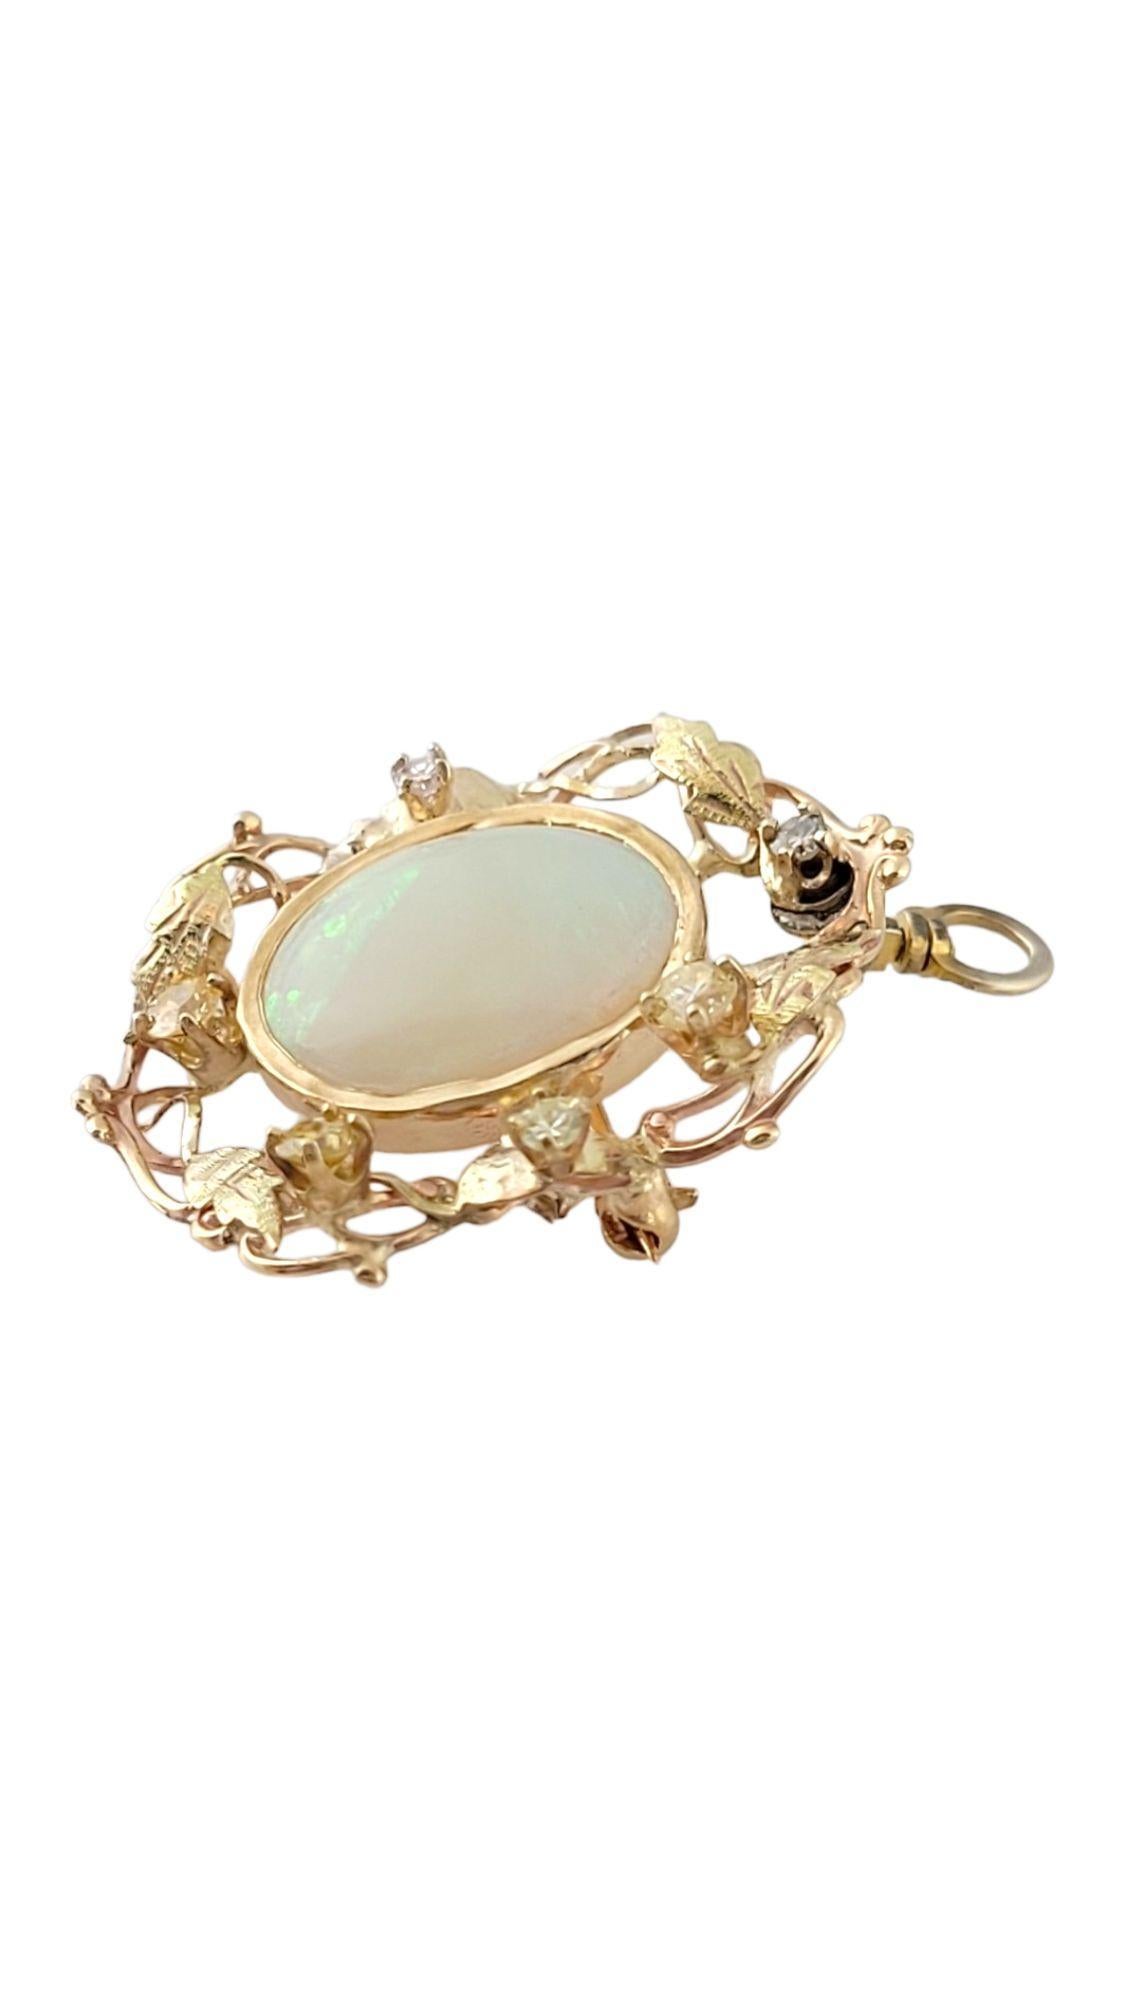 Vintage 10K Yellow Gold Opal and Diamond Pin/Pendant

This gorgeous pin has a beautiful opal set in 10K yellow gold and surrounded by 6 sparkling, single and round brilliant cut diamonds, and it even doubles as a pendant!

Approximate total diamond